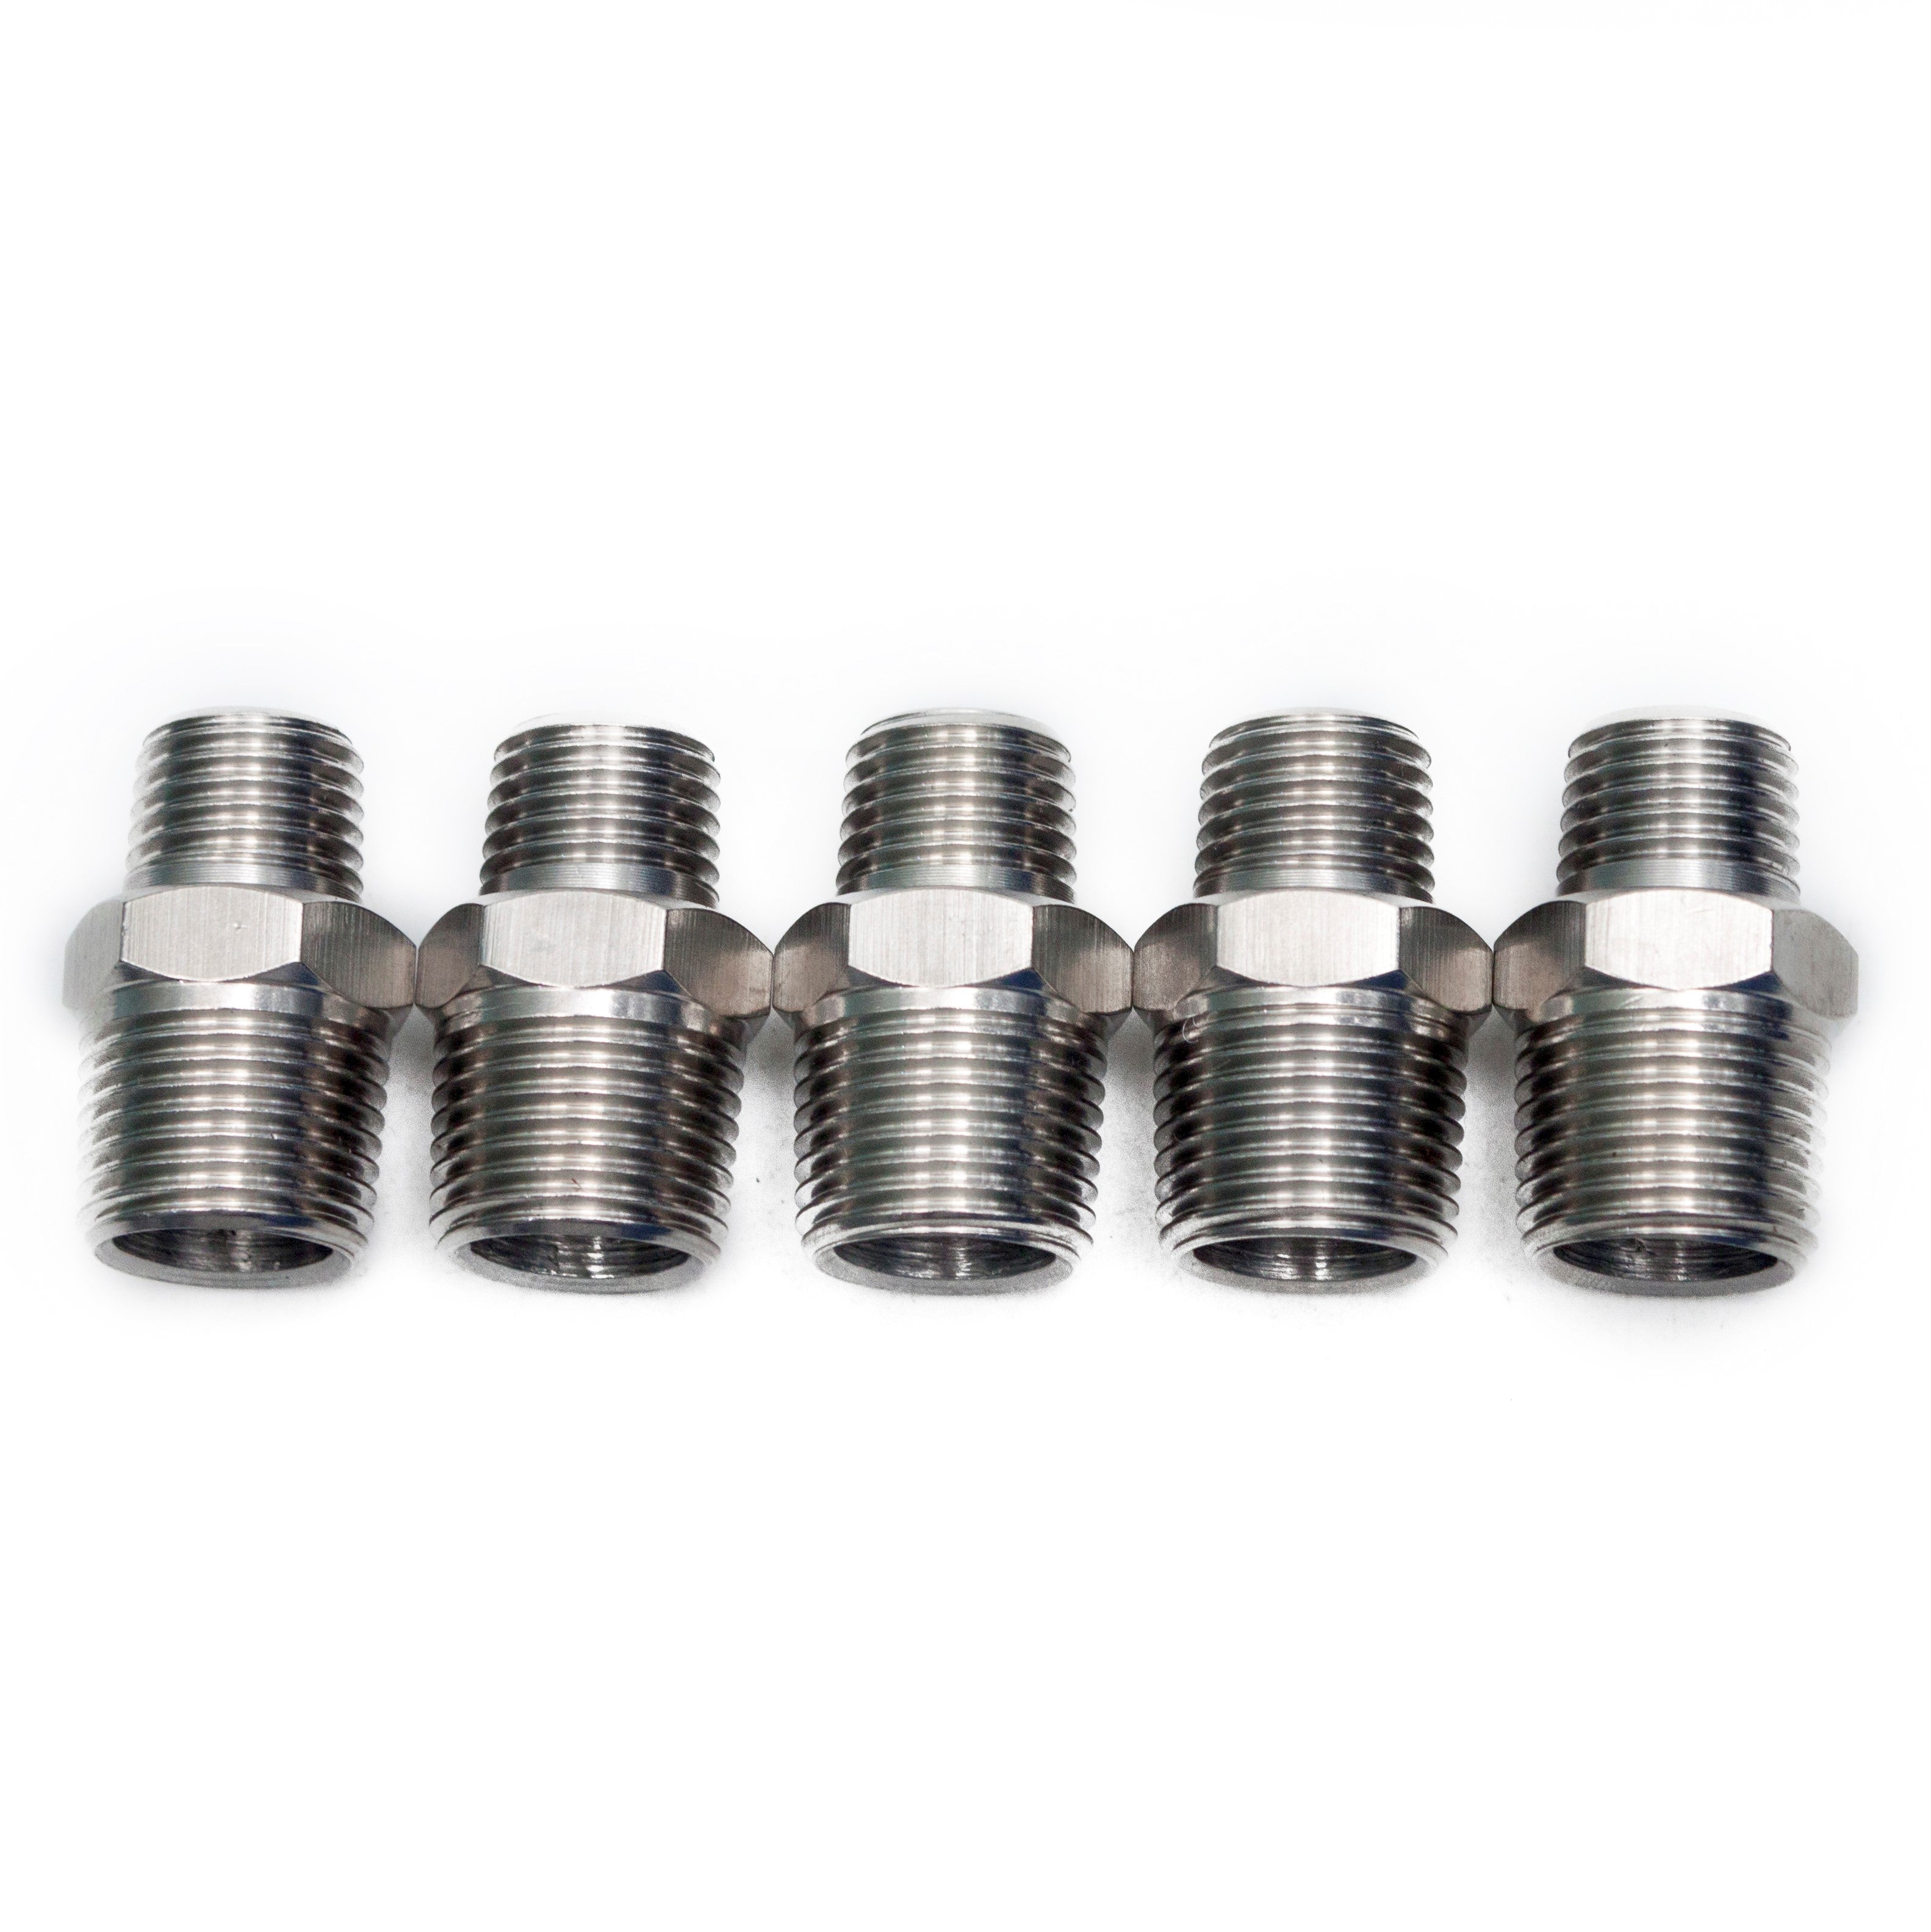 LTWFITTING Bar Production Stainless Steel 316 Pipe Hex Reducing Nipple Fitting 3/8 Inch x 1/4 Inch Male NPT Water Boat (Pack of 5)